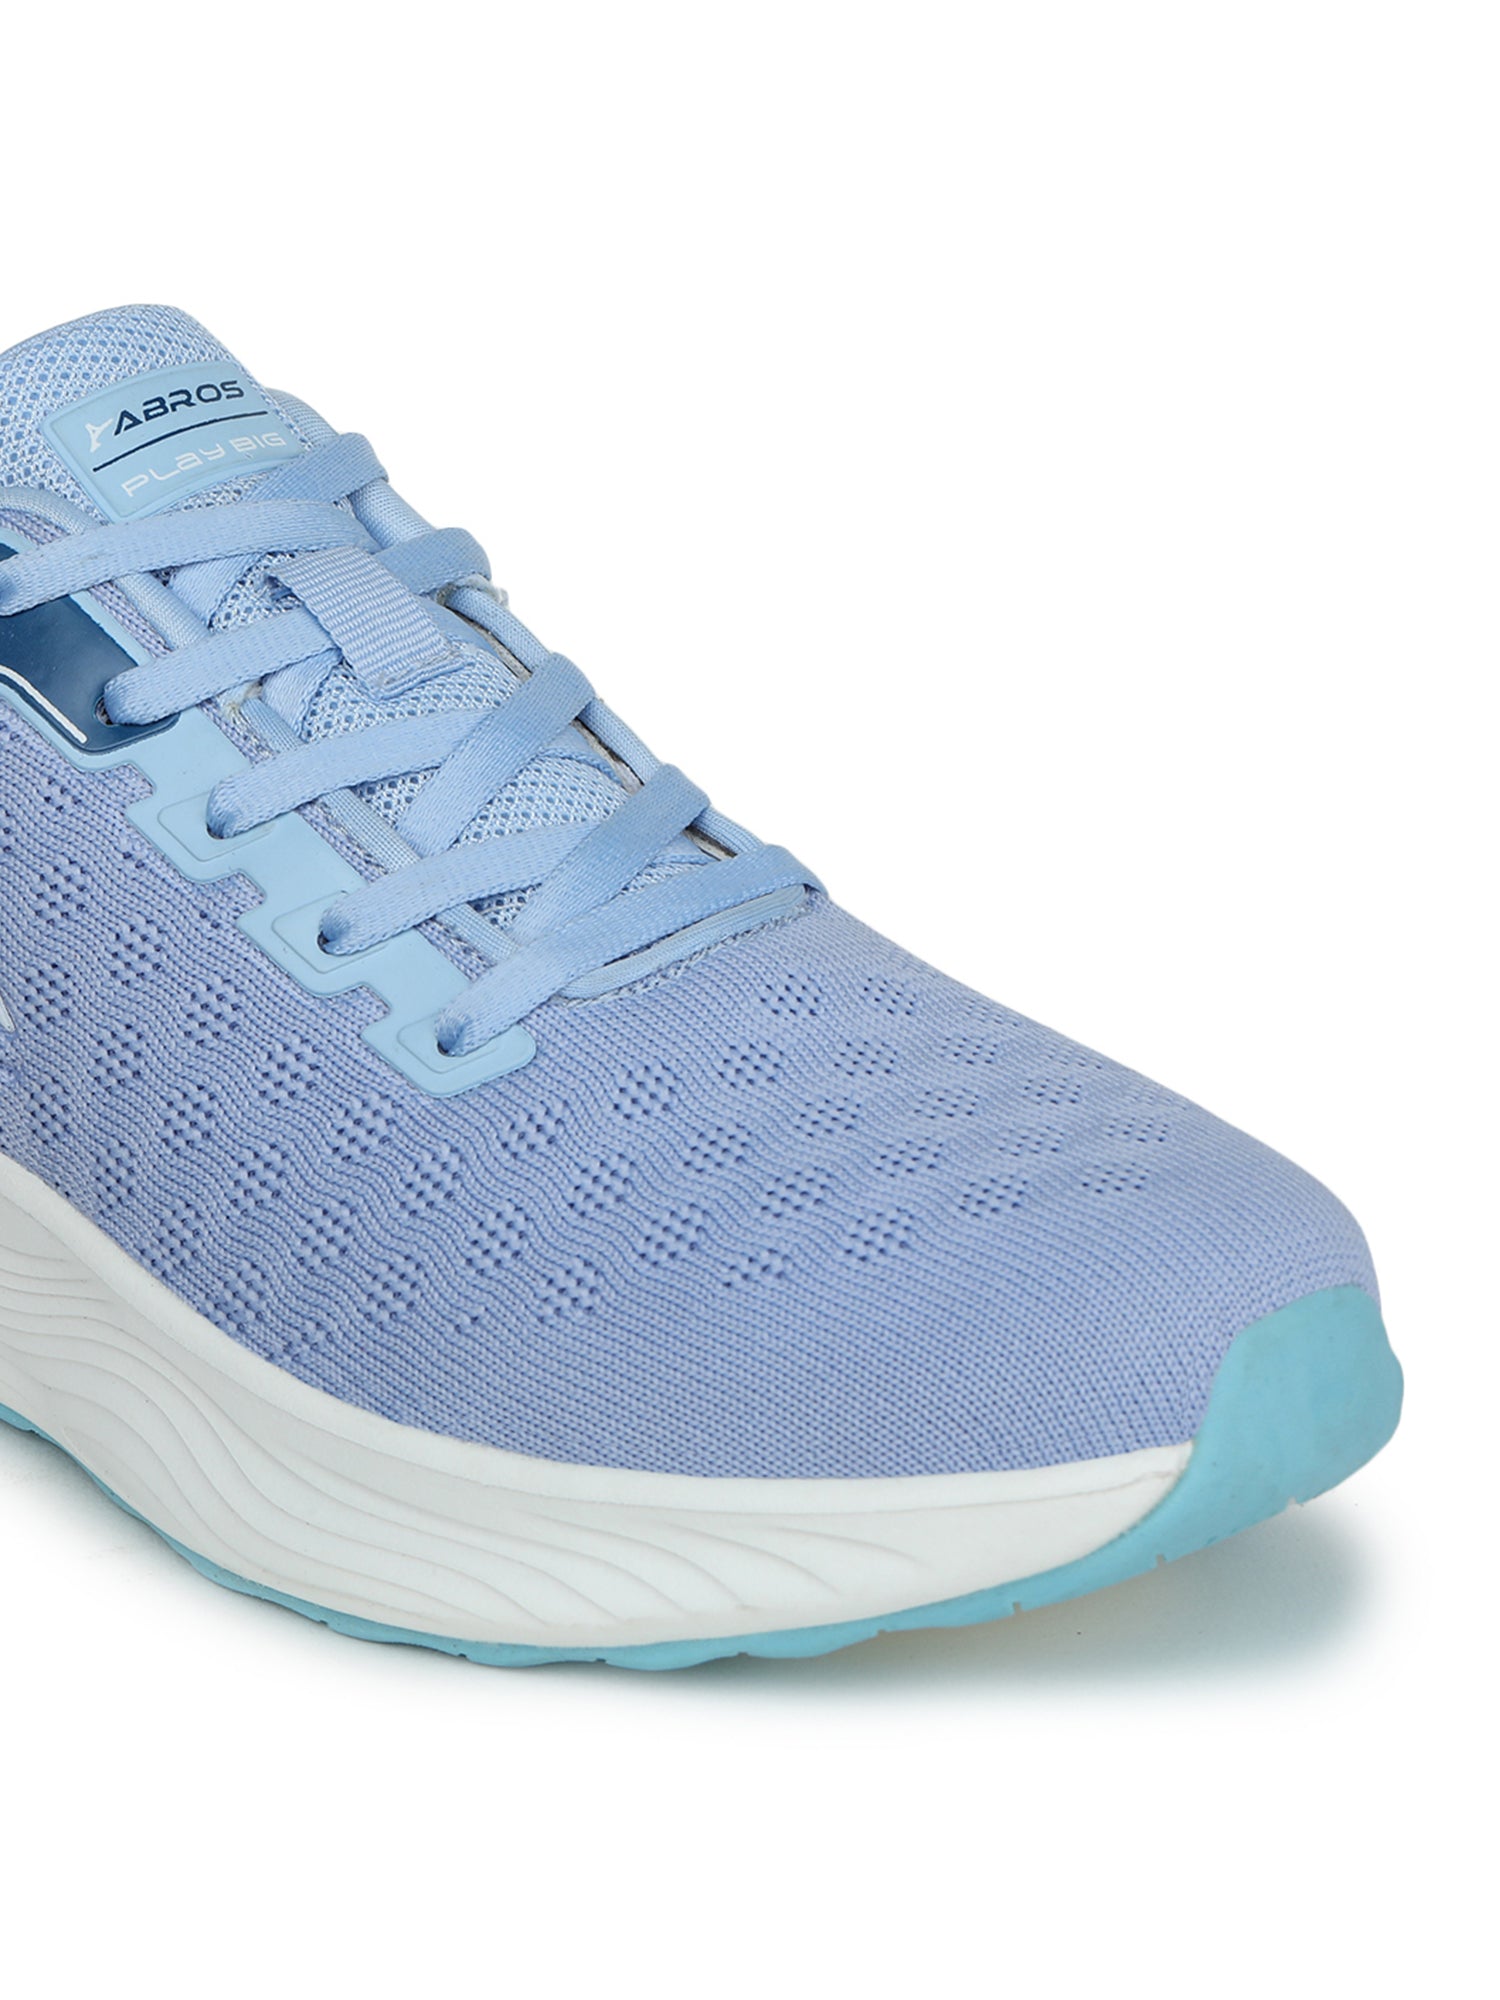 AXEL SPORTS SHOES FOR WOMEN